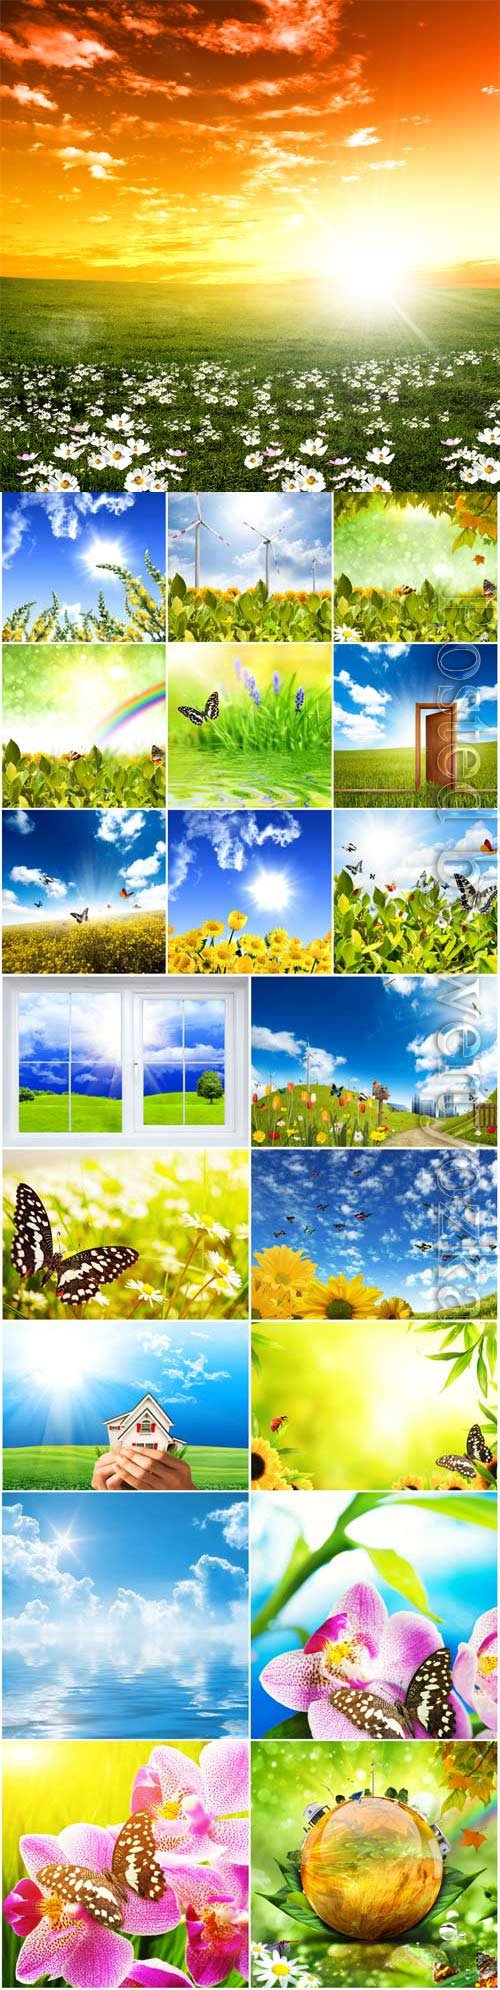 Floral summer backgrounds stock photo